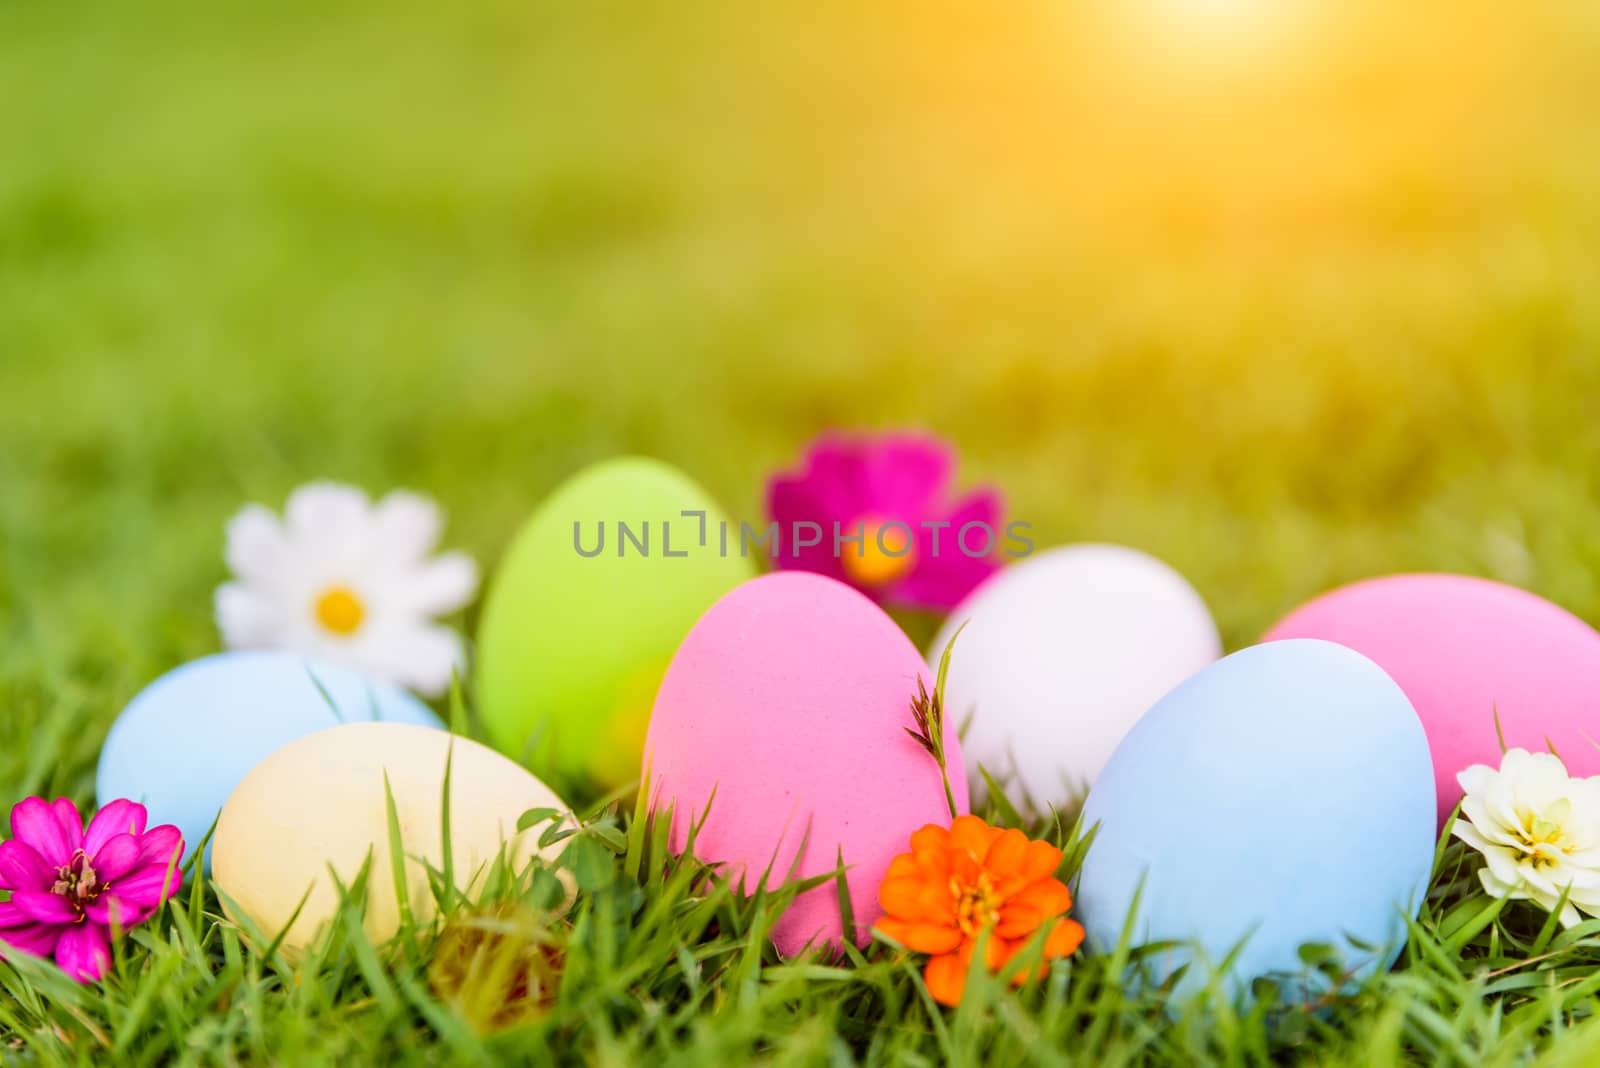 Happy easter!  Closeup Colorful Easter eggs on green grass field background.